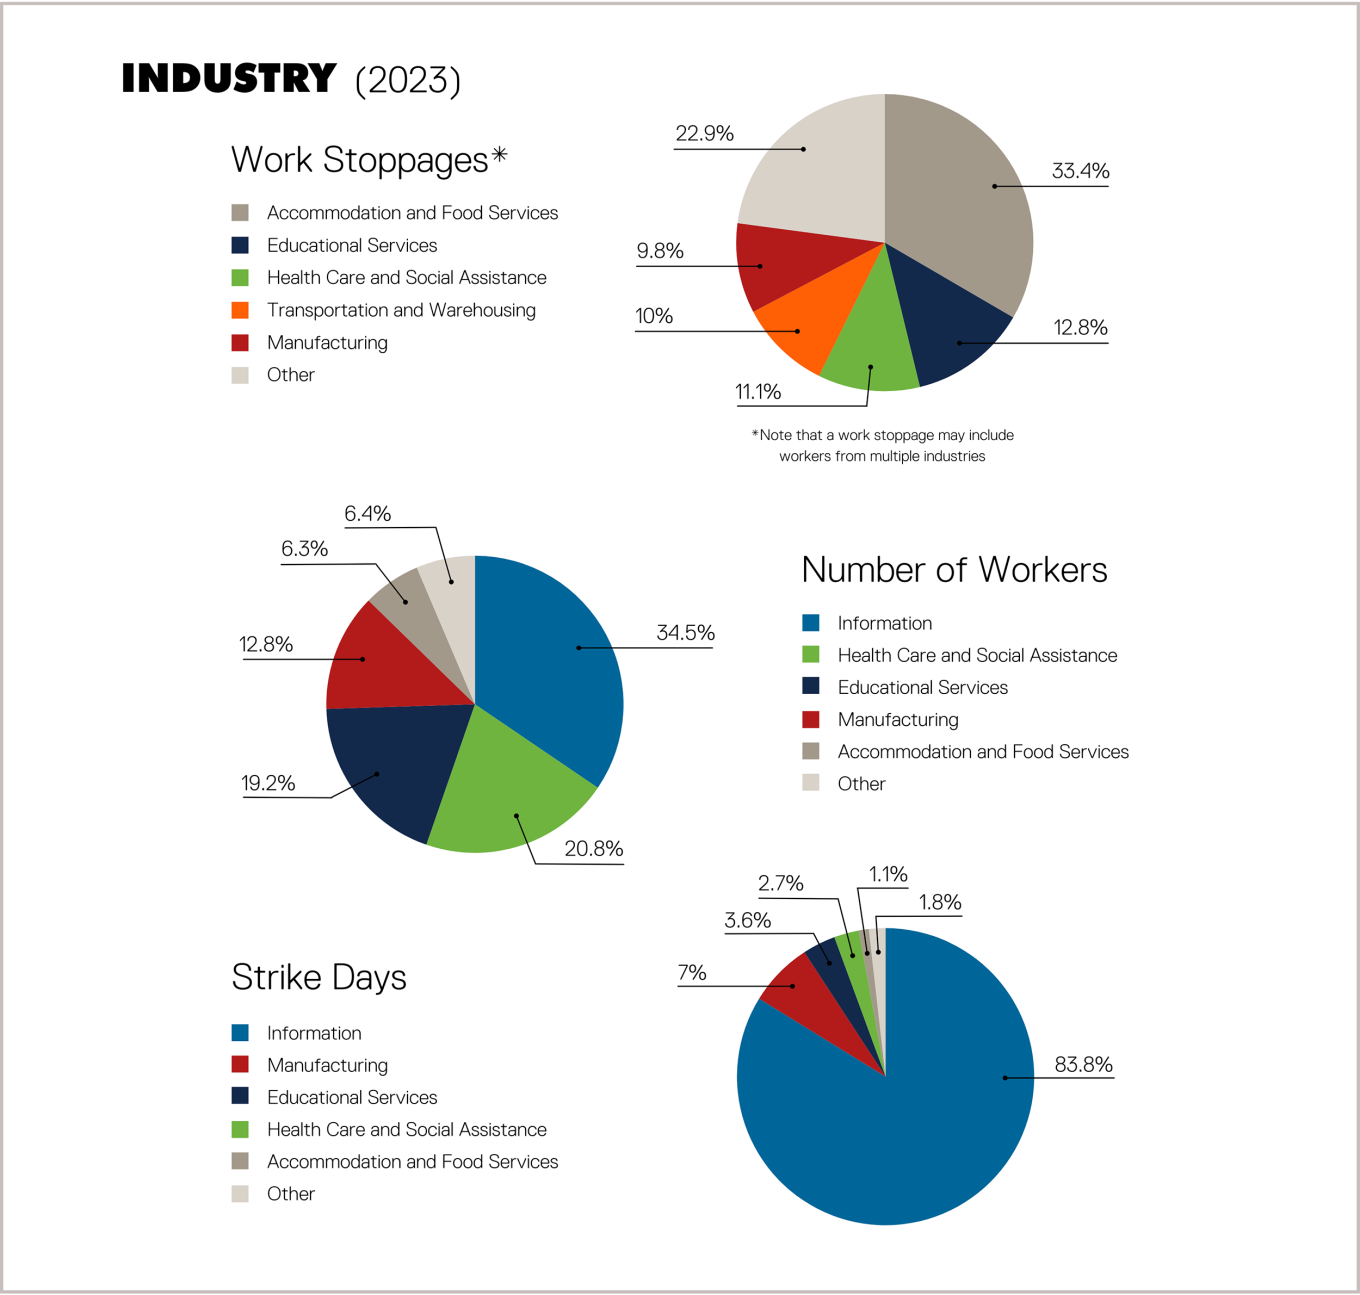 Pie charts showing the breakdown of U.S. strikes and work stoppages by industry in 2023